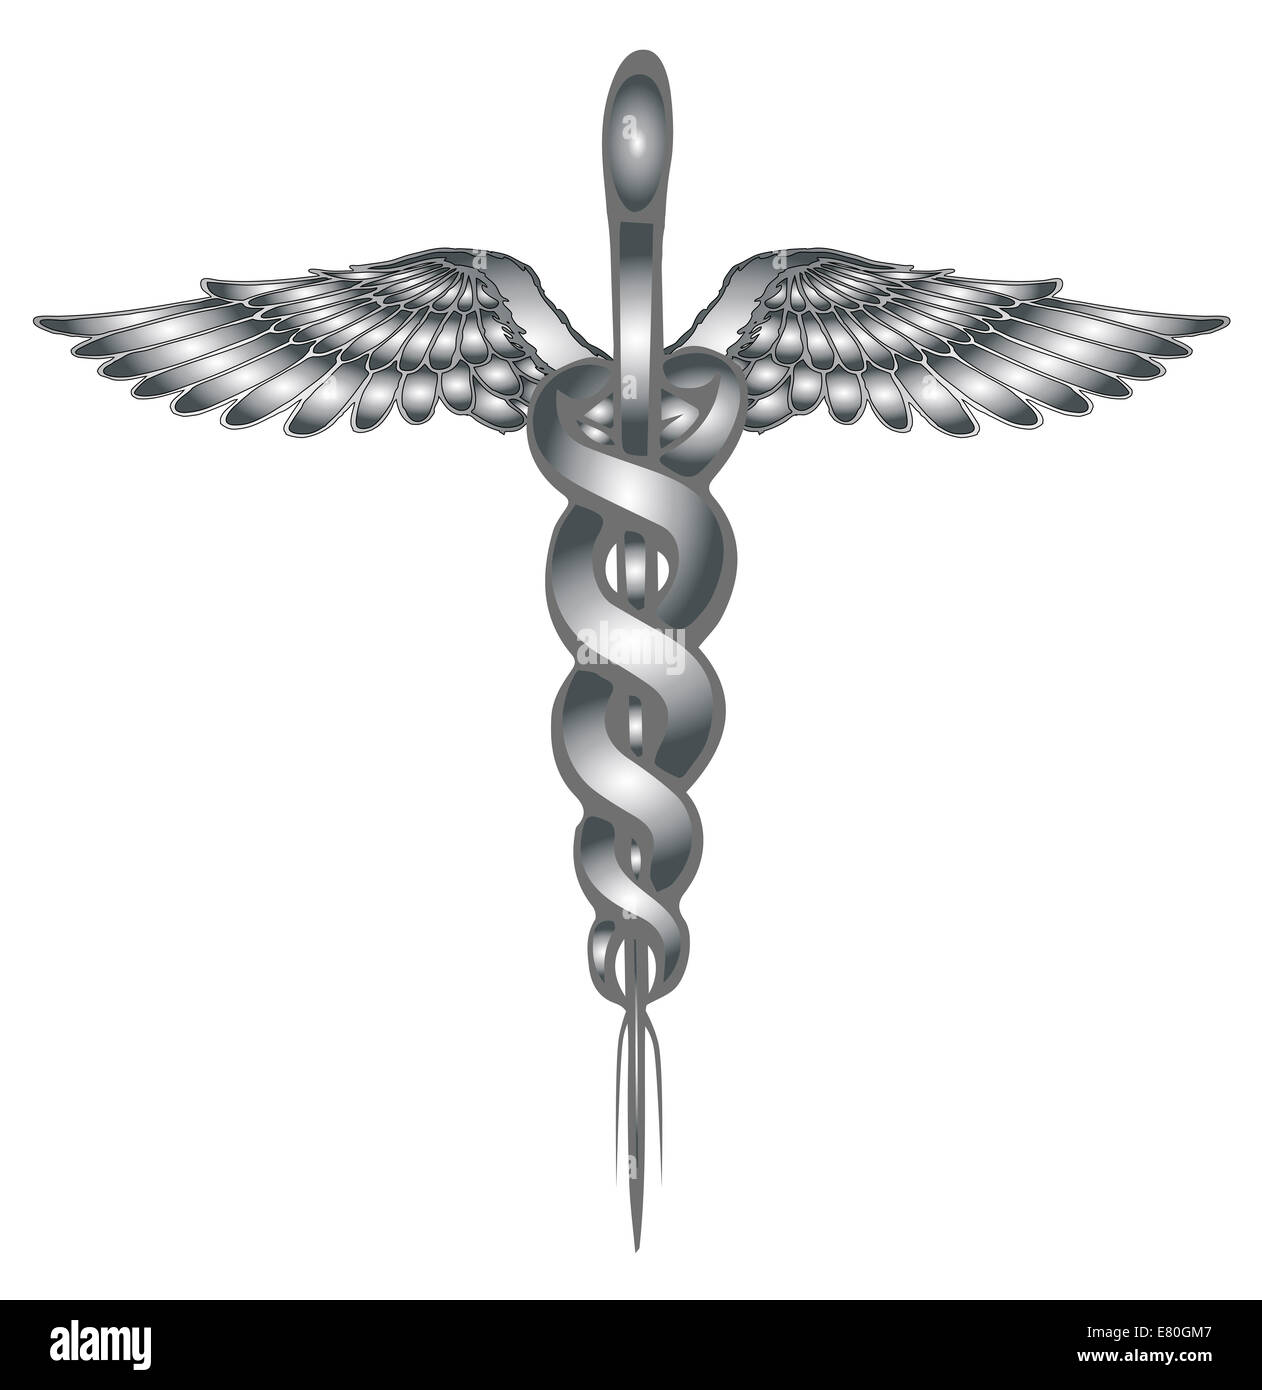 The Caduceus Medical Symbol isolated on a white background Stock Photo